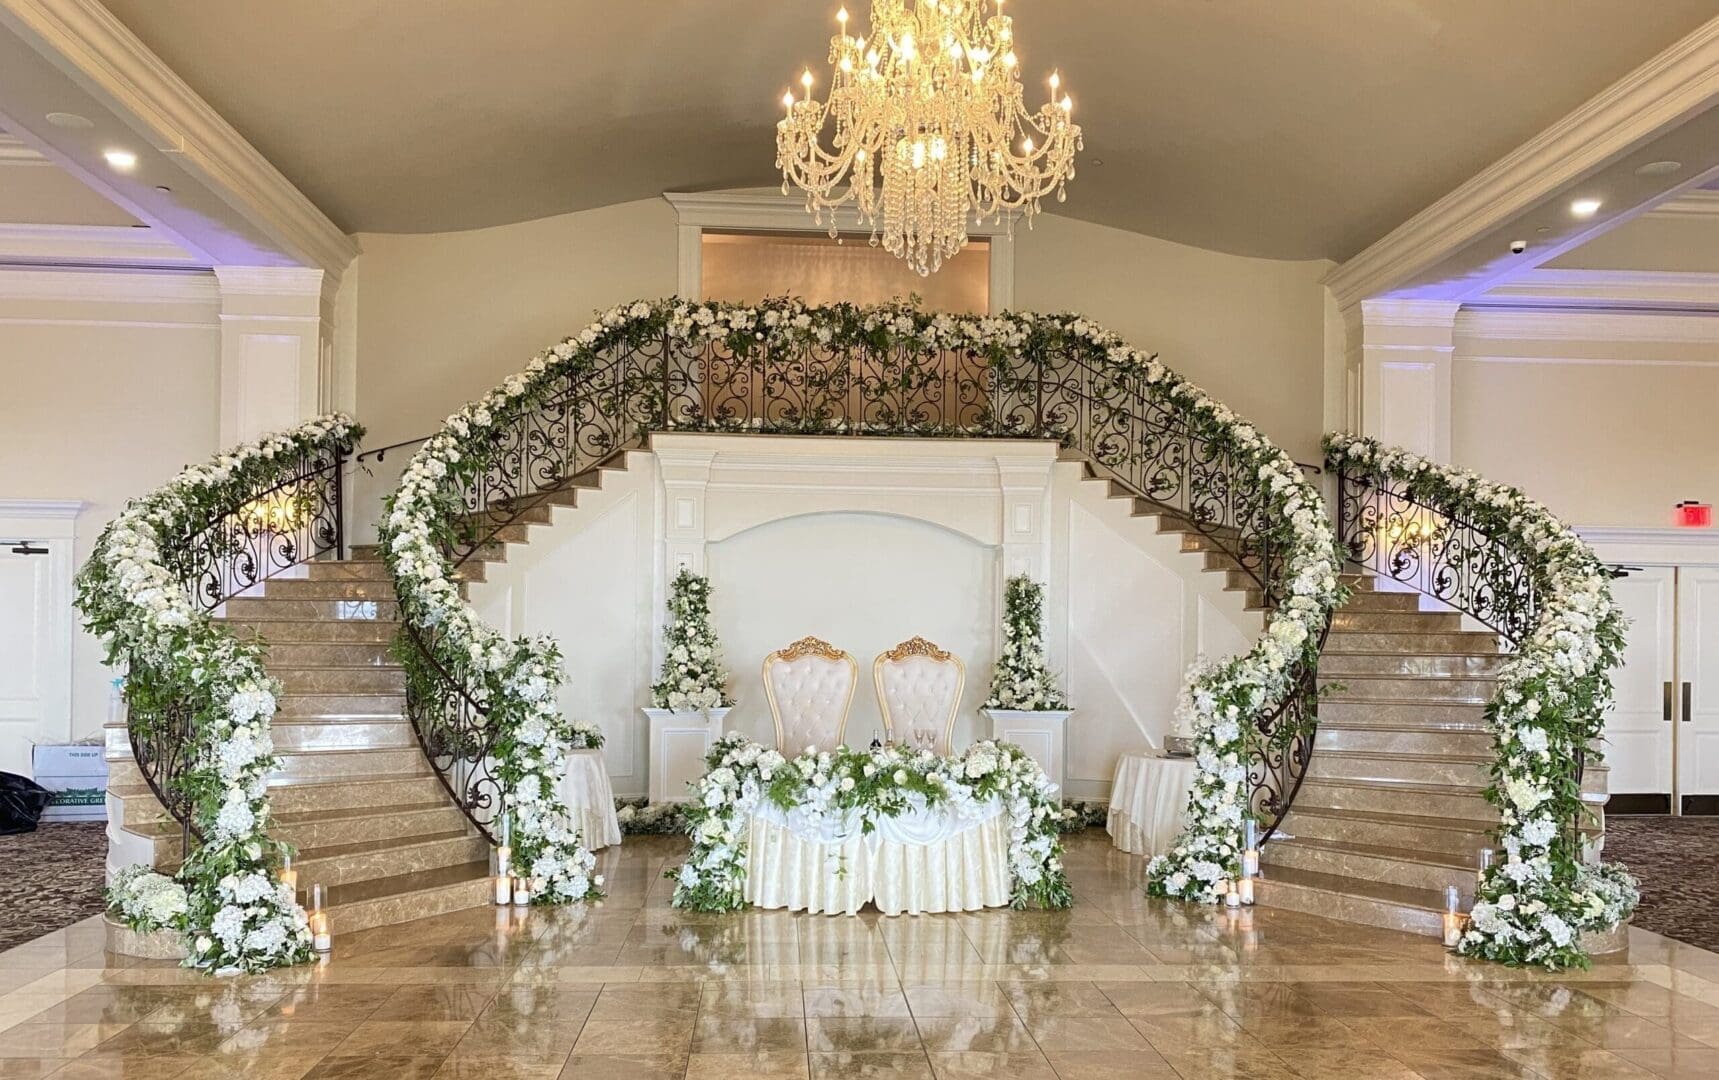 A wedding ceremony set up with white flowers and a chandelier.